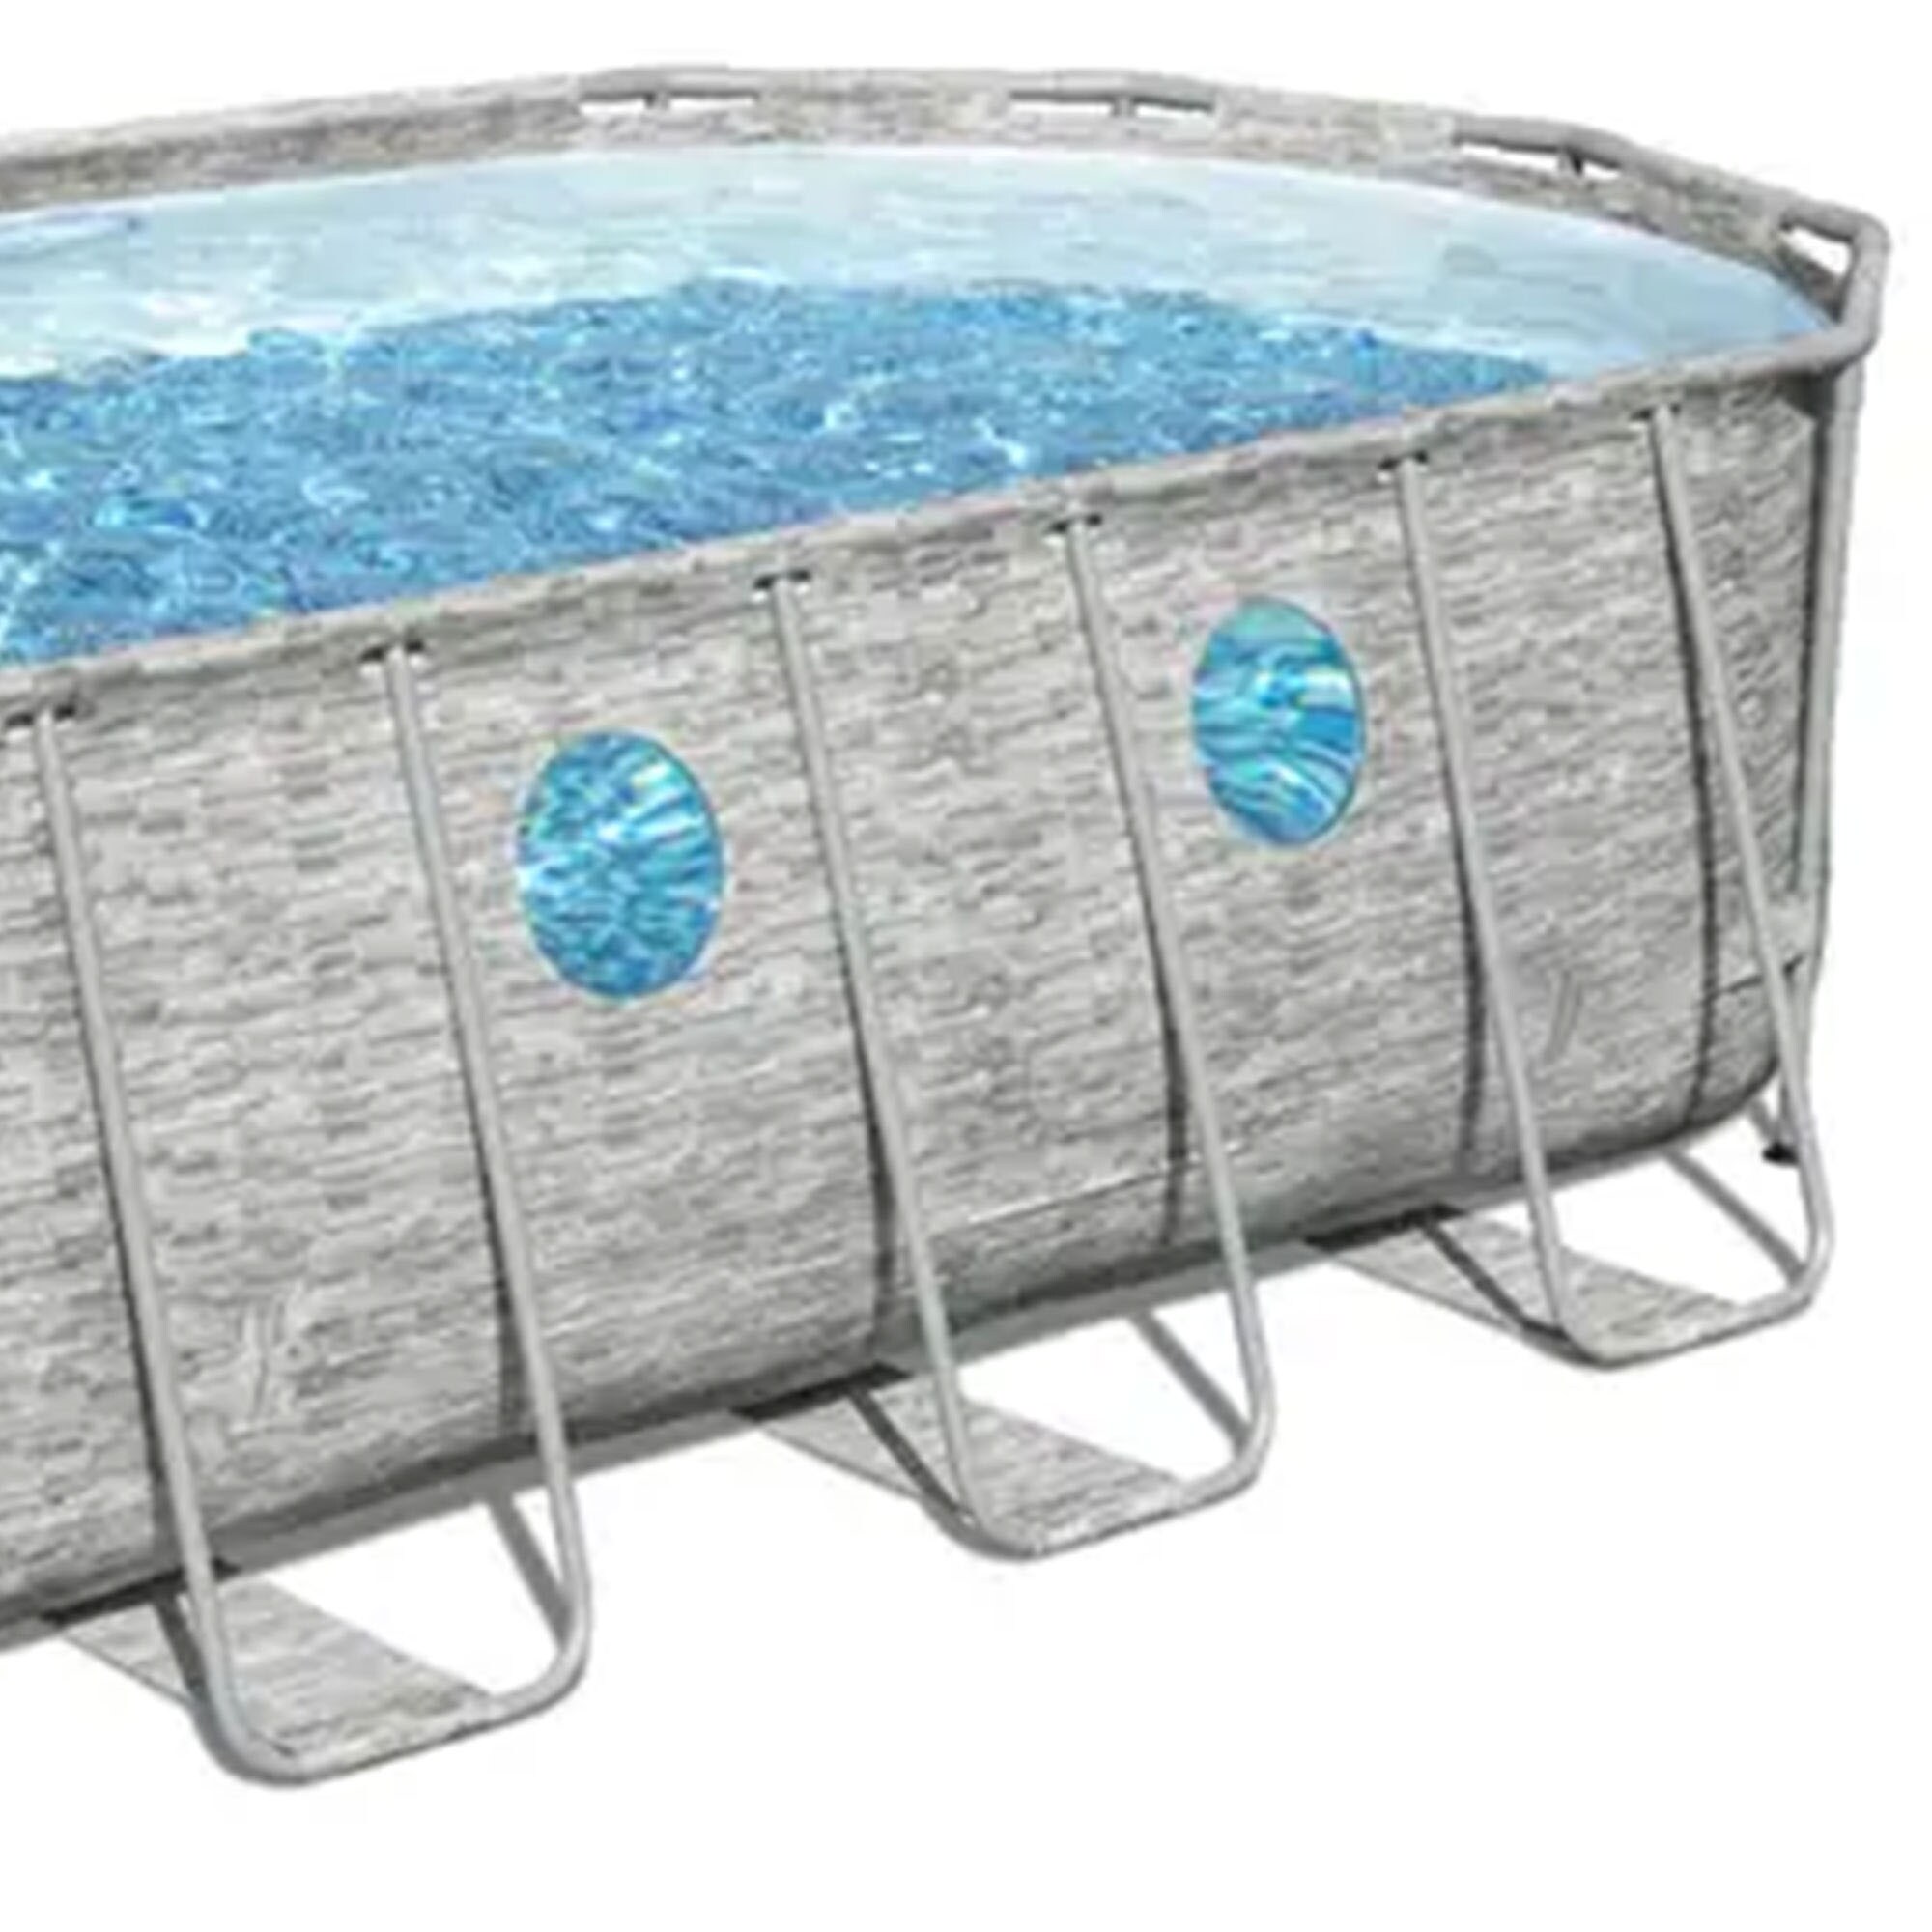 Bestway Power Steel Swim Above-Ground at Filter 48-in Steel Oval x Above-Ground the Panels Pool and x 18-ft department Wall Vista Pools in Pump,Pool Cover with Ladder 9-ft